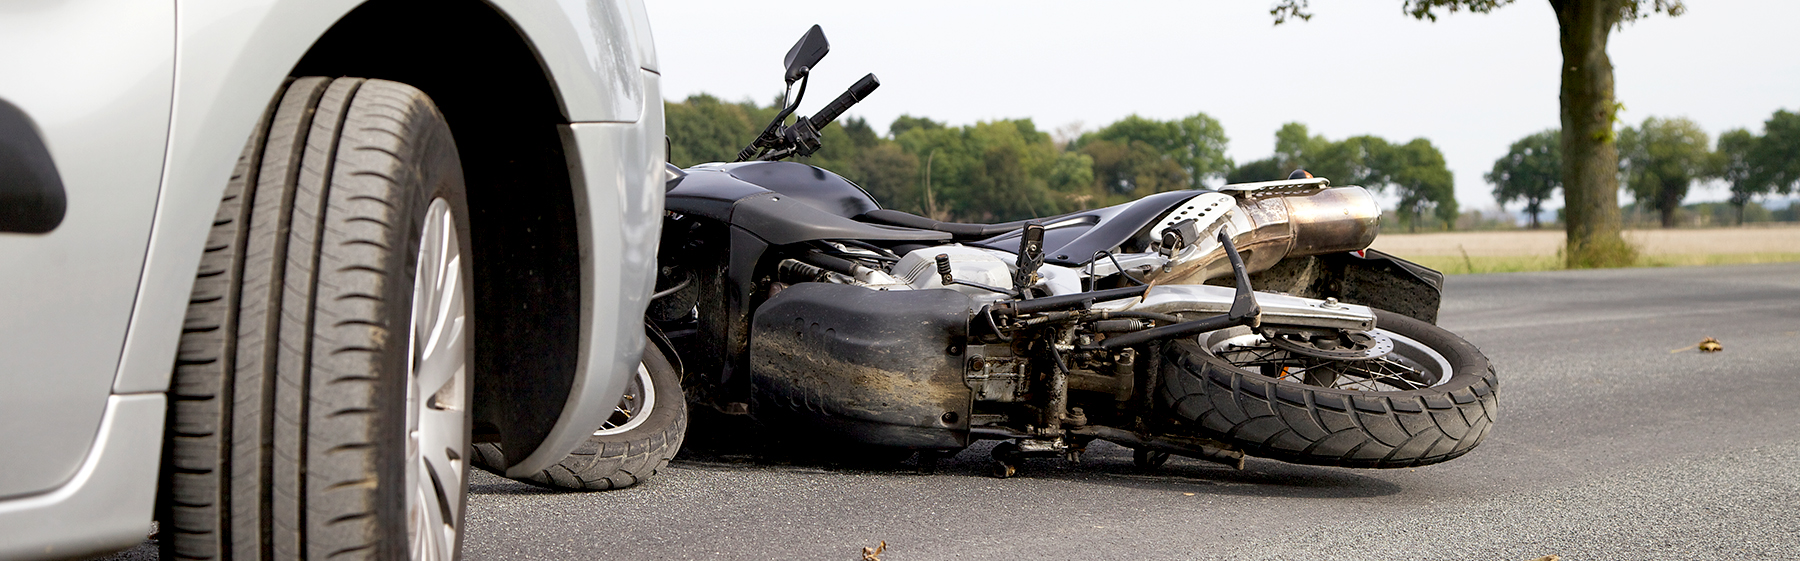 There are a number of factors that can contribute to a motorcycle crash that causes injuries or fatalities.